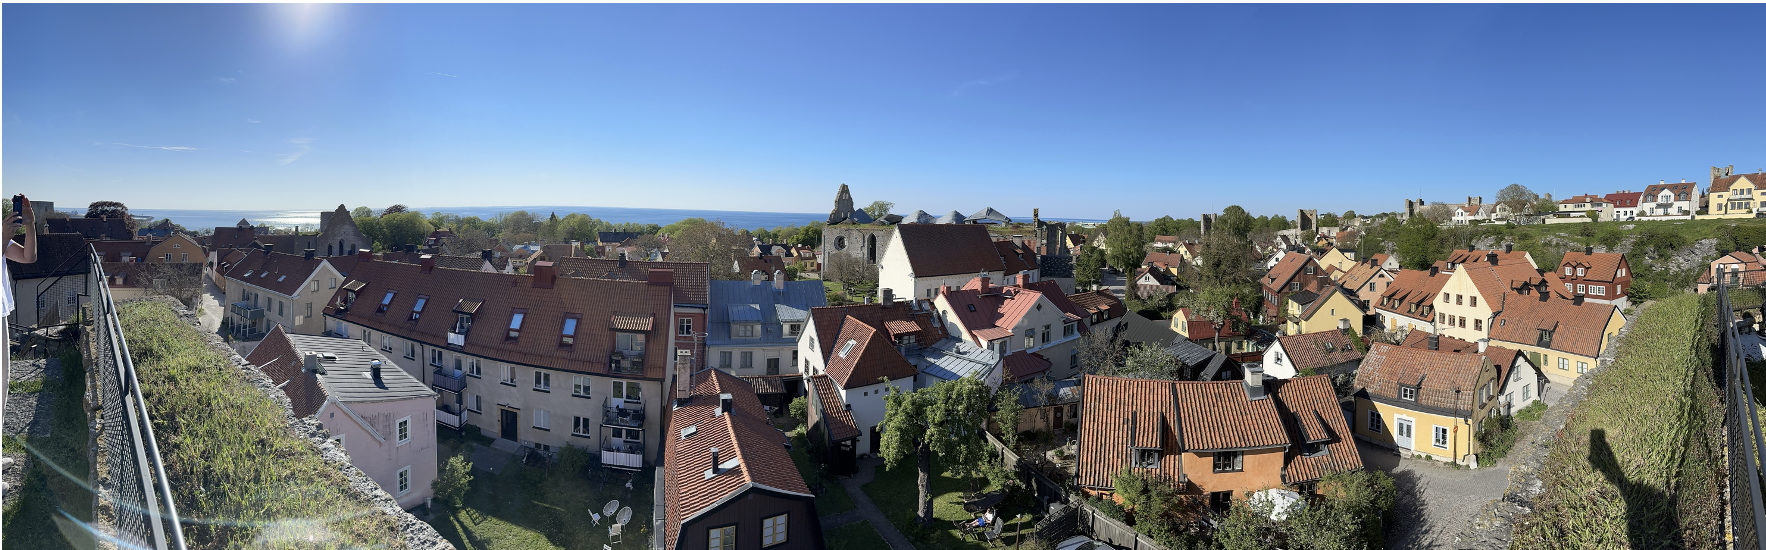 visby.png